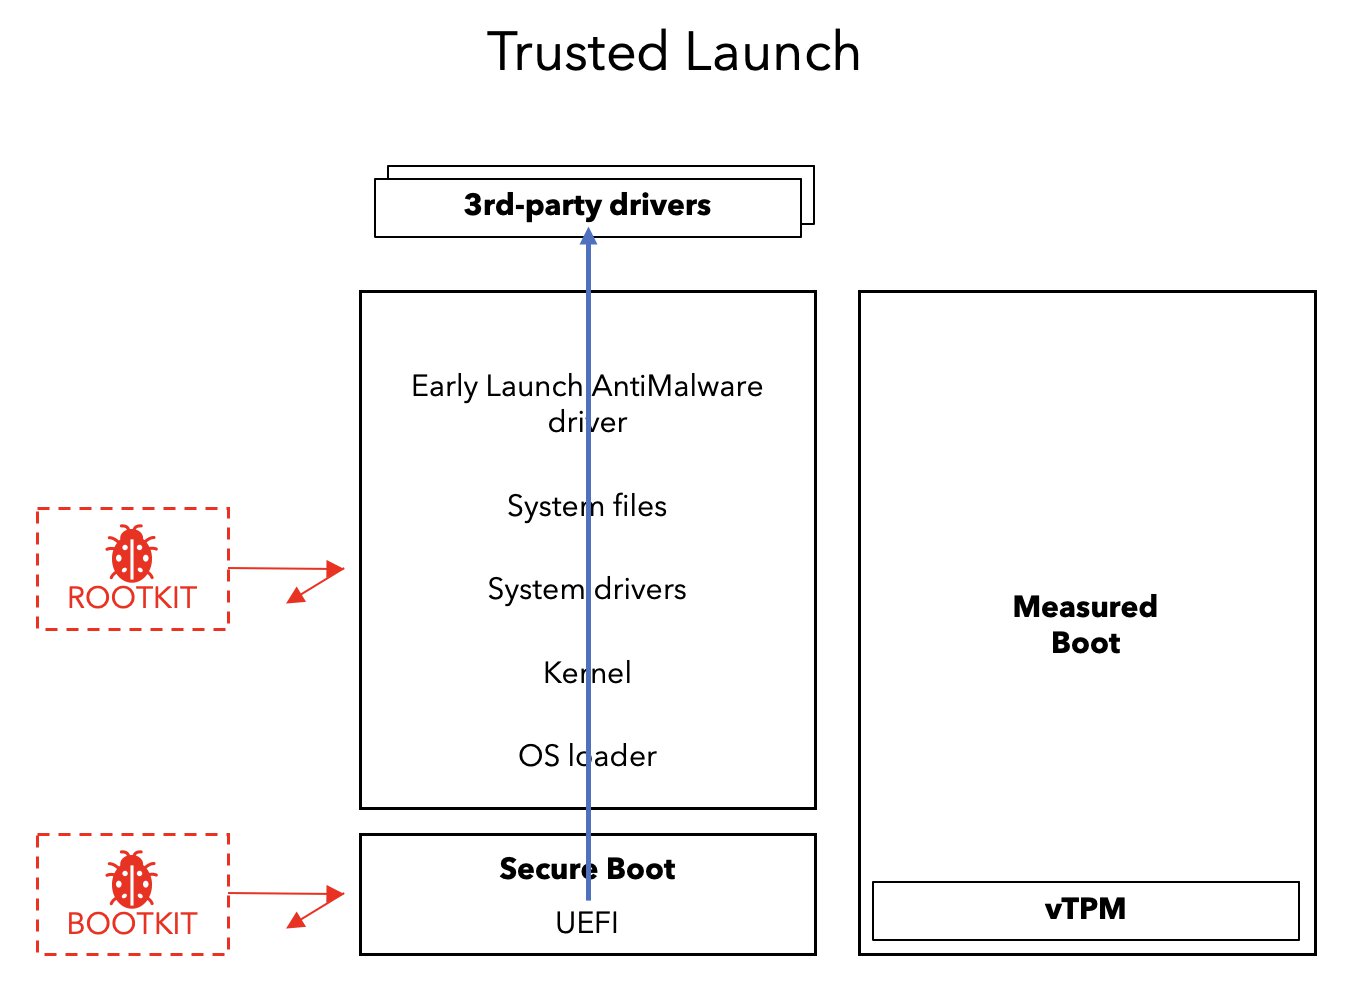 Overview of trusted launch capabilities.